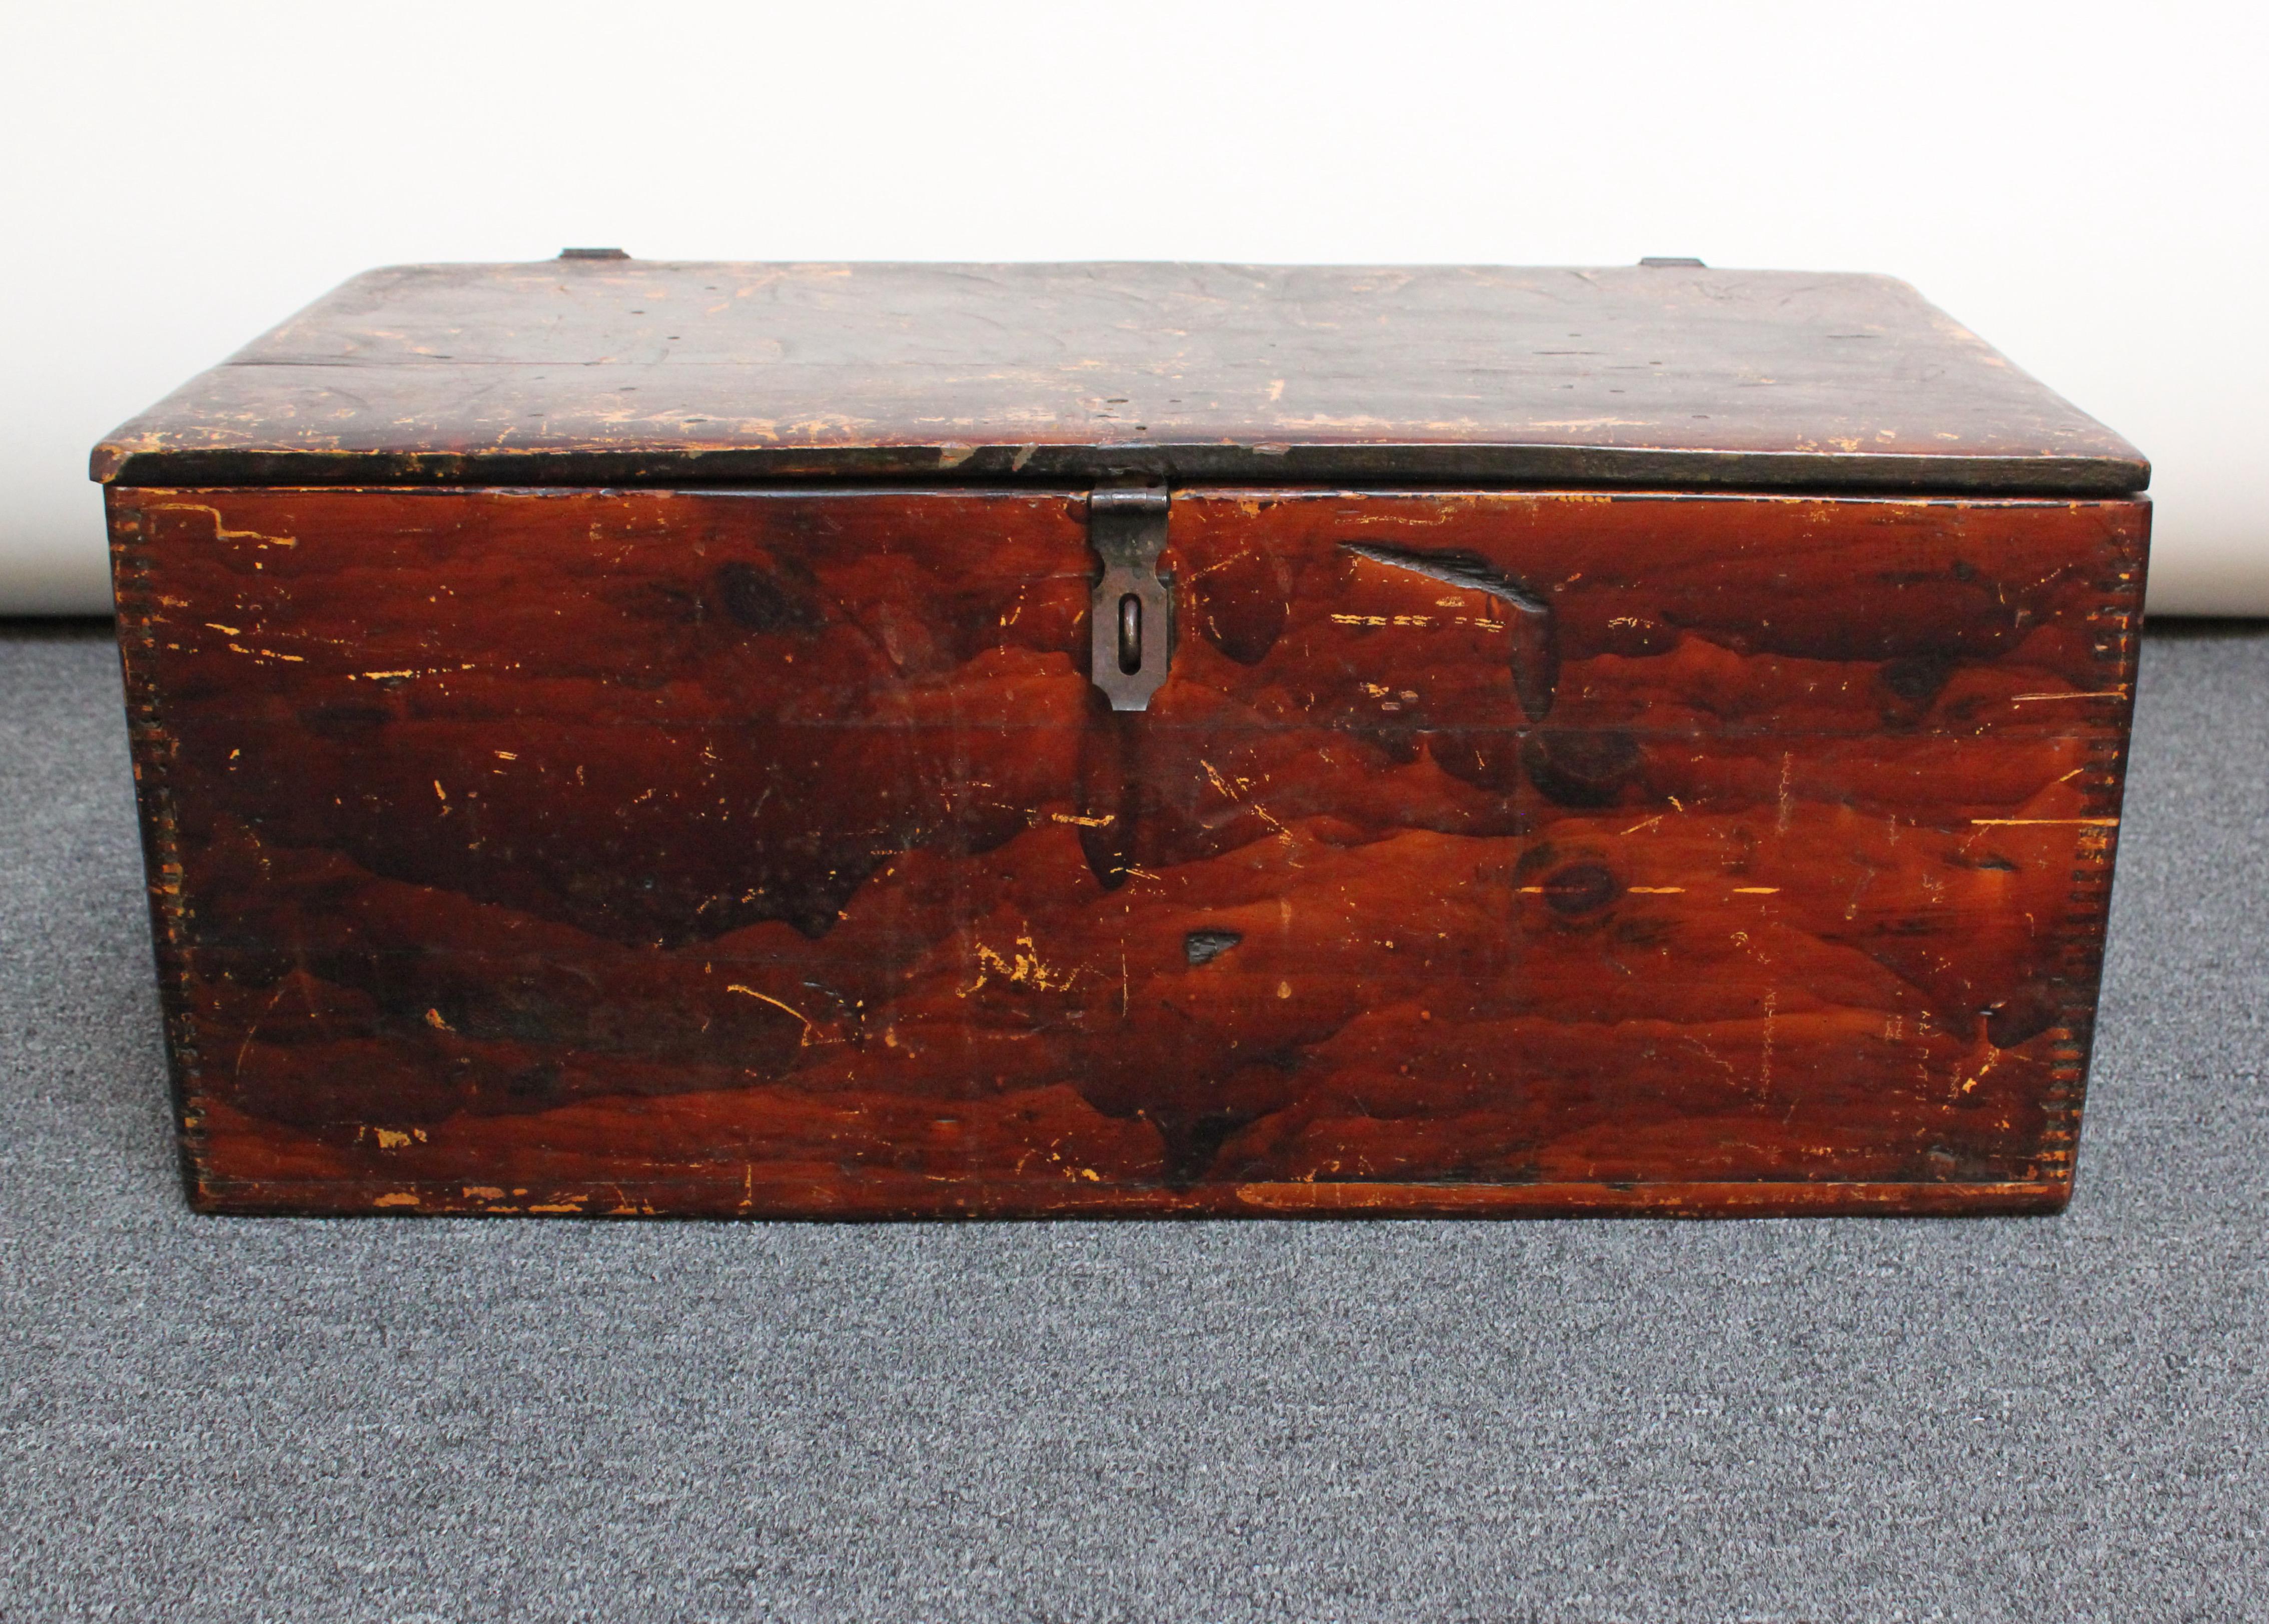 Handmade travel trunk carved from maple wood planks with applied steel hinges and clasp. 
The hinged top opens to reveal a removable, divided tray providing an additional storage compartment. 
The surface shows very early crude planing impressions,